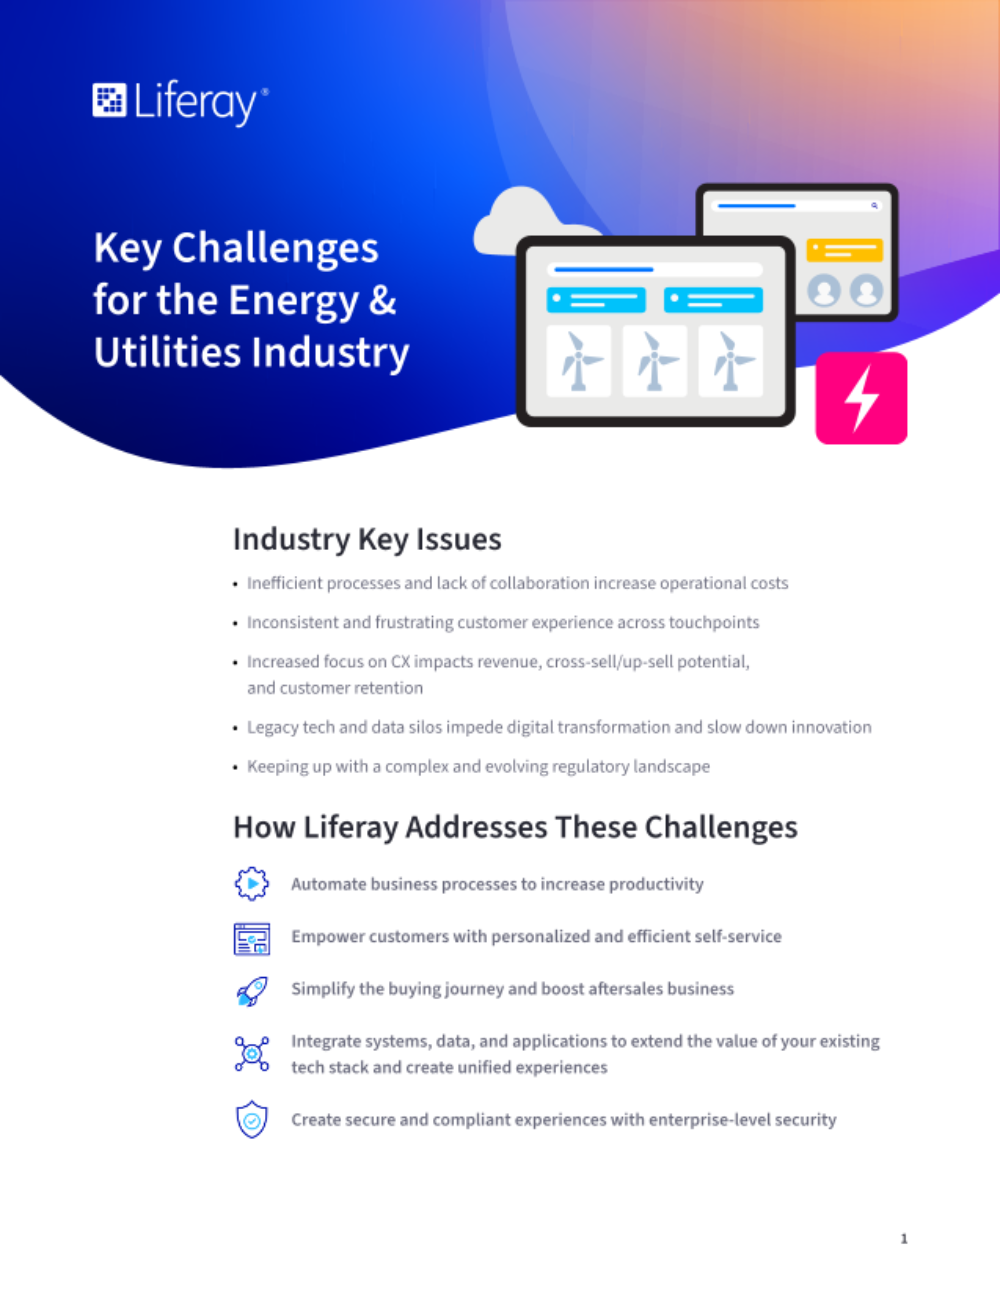 Key Challenges for the Energy and Utilities Industry – and How Liferay Addresses Them